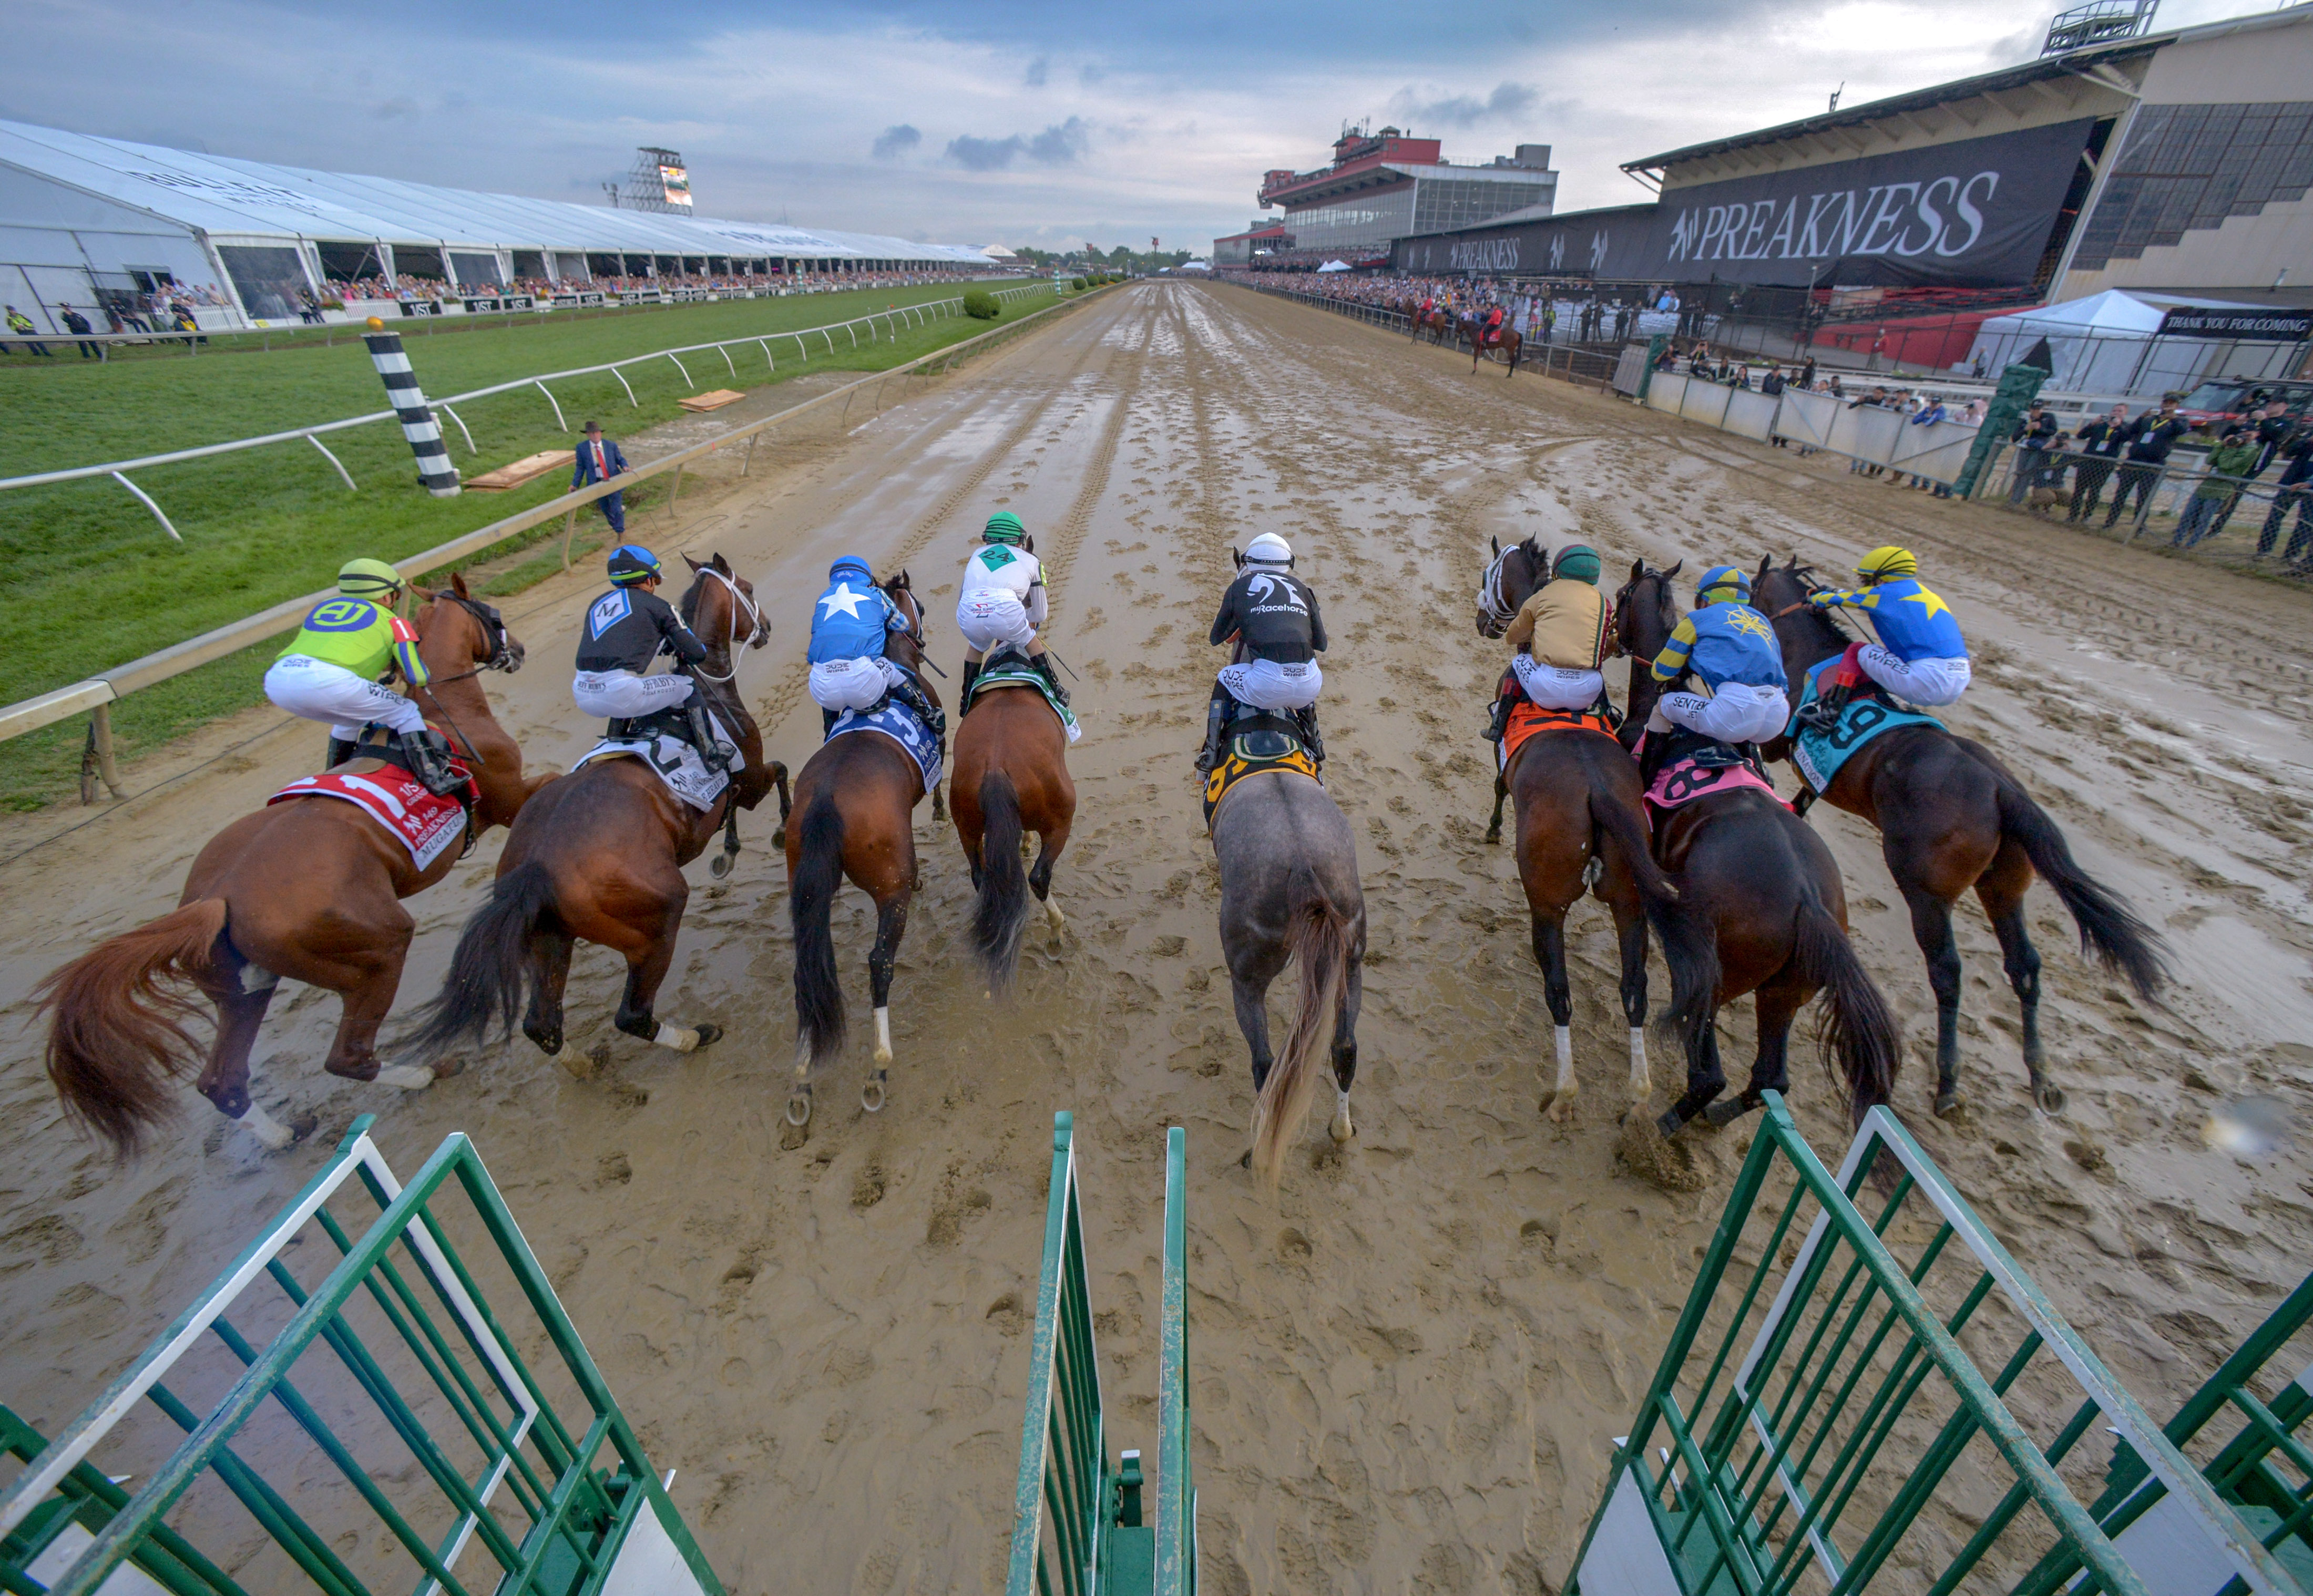 Jockey Jaime Torres, riding Seize the Grey alone at center, breaks out of the starting gate with the pack of eight horses during the 149th running of the Preakness Stakes at Pimlico Race Course. Seize the Grey ridden by Jaime Torres won. (Karl Merton Ferron/Staff)